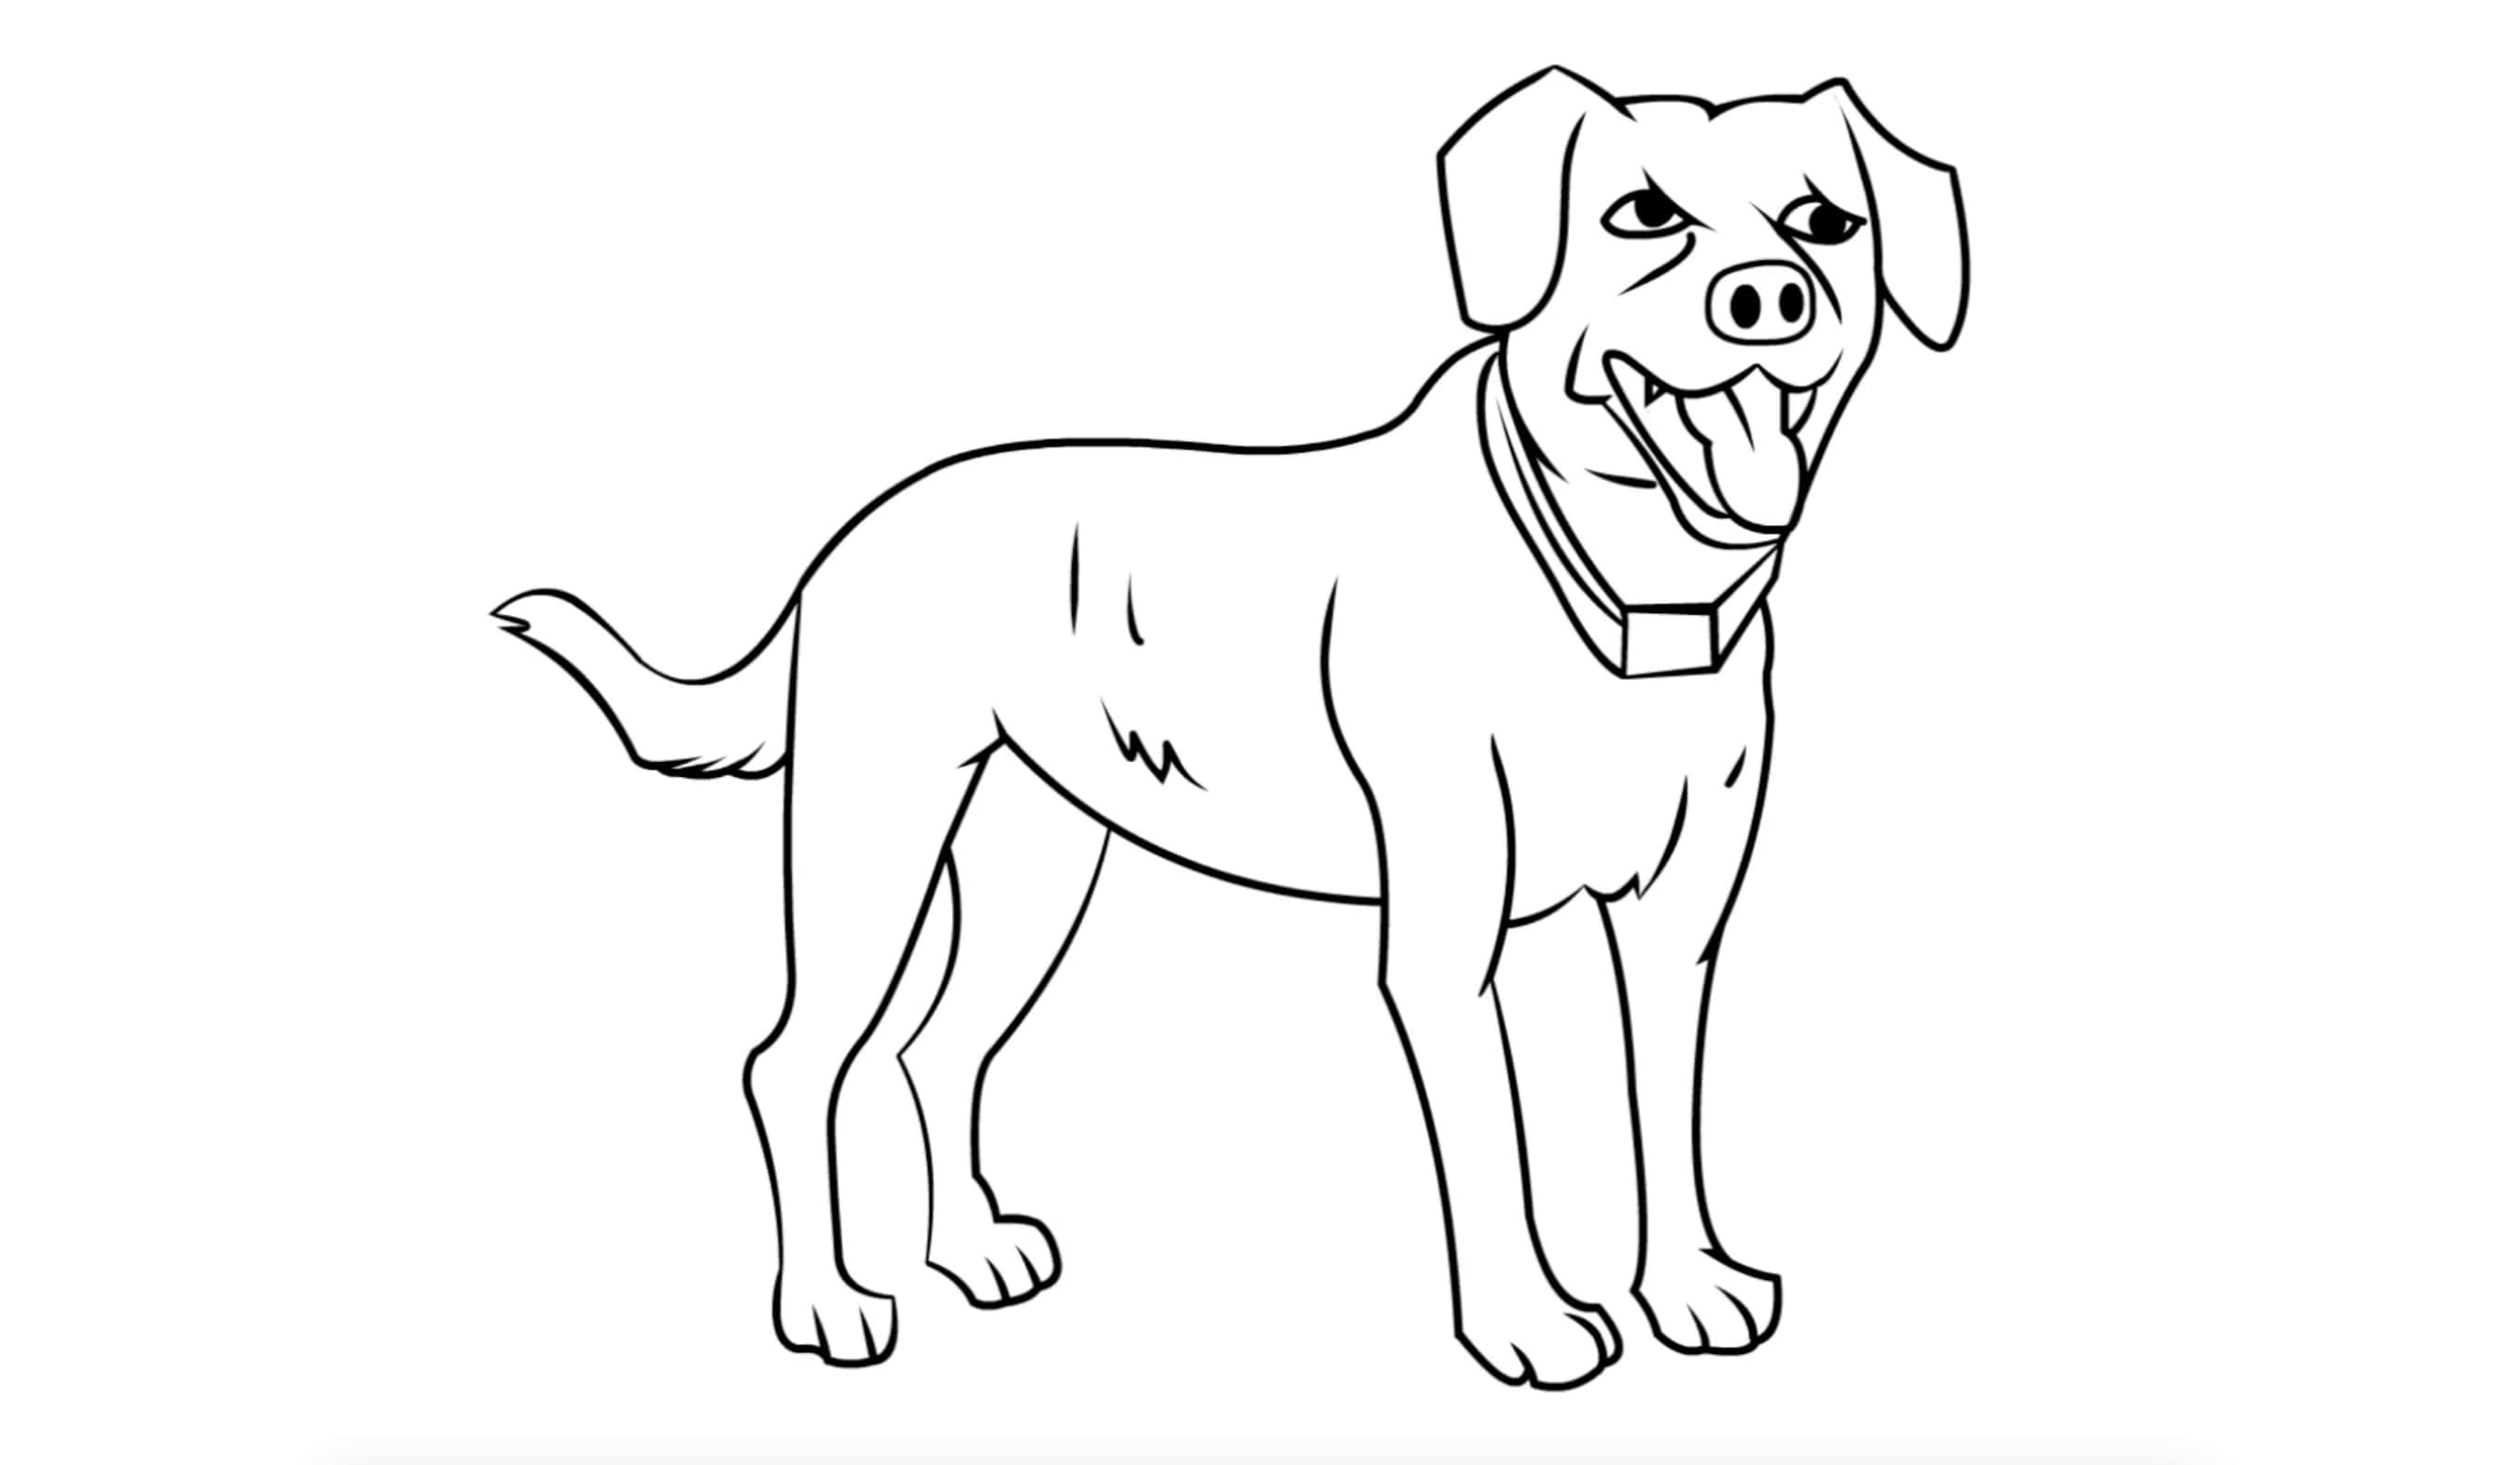 A Dog Coloring Page With A Tongue Sticking Out